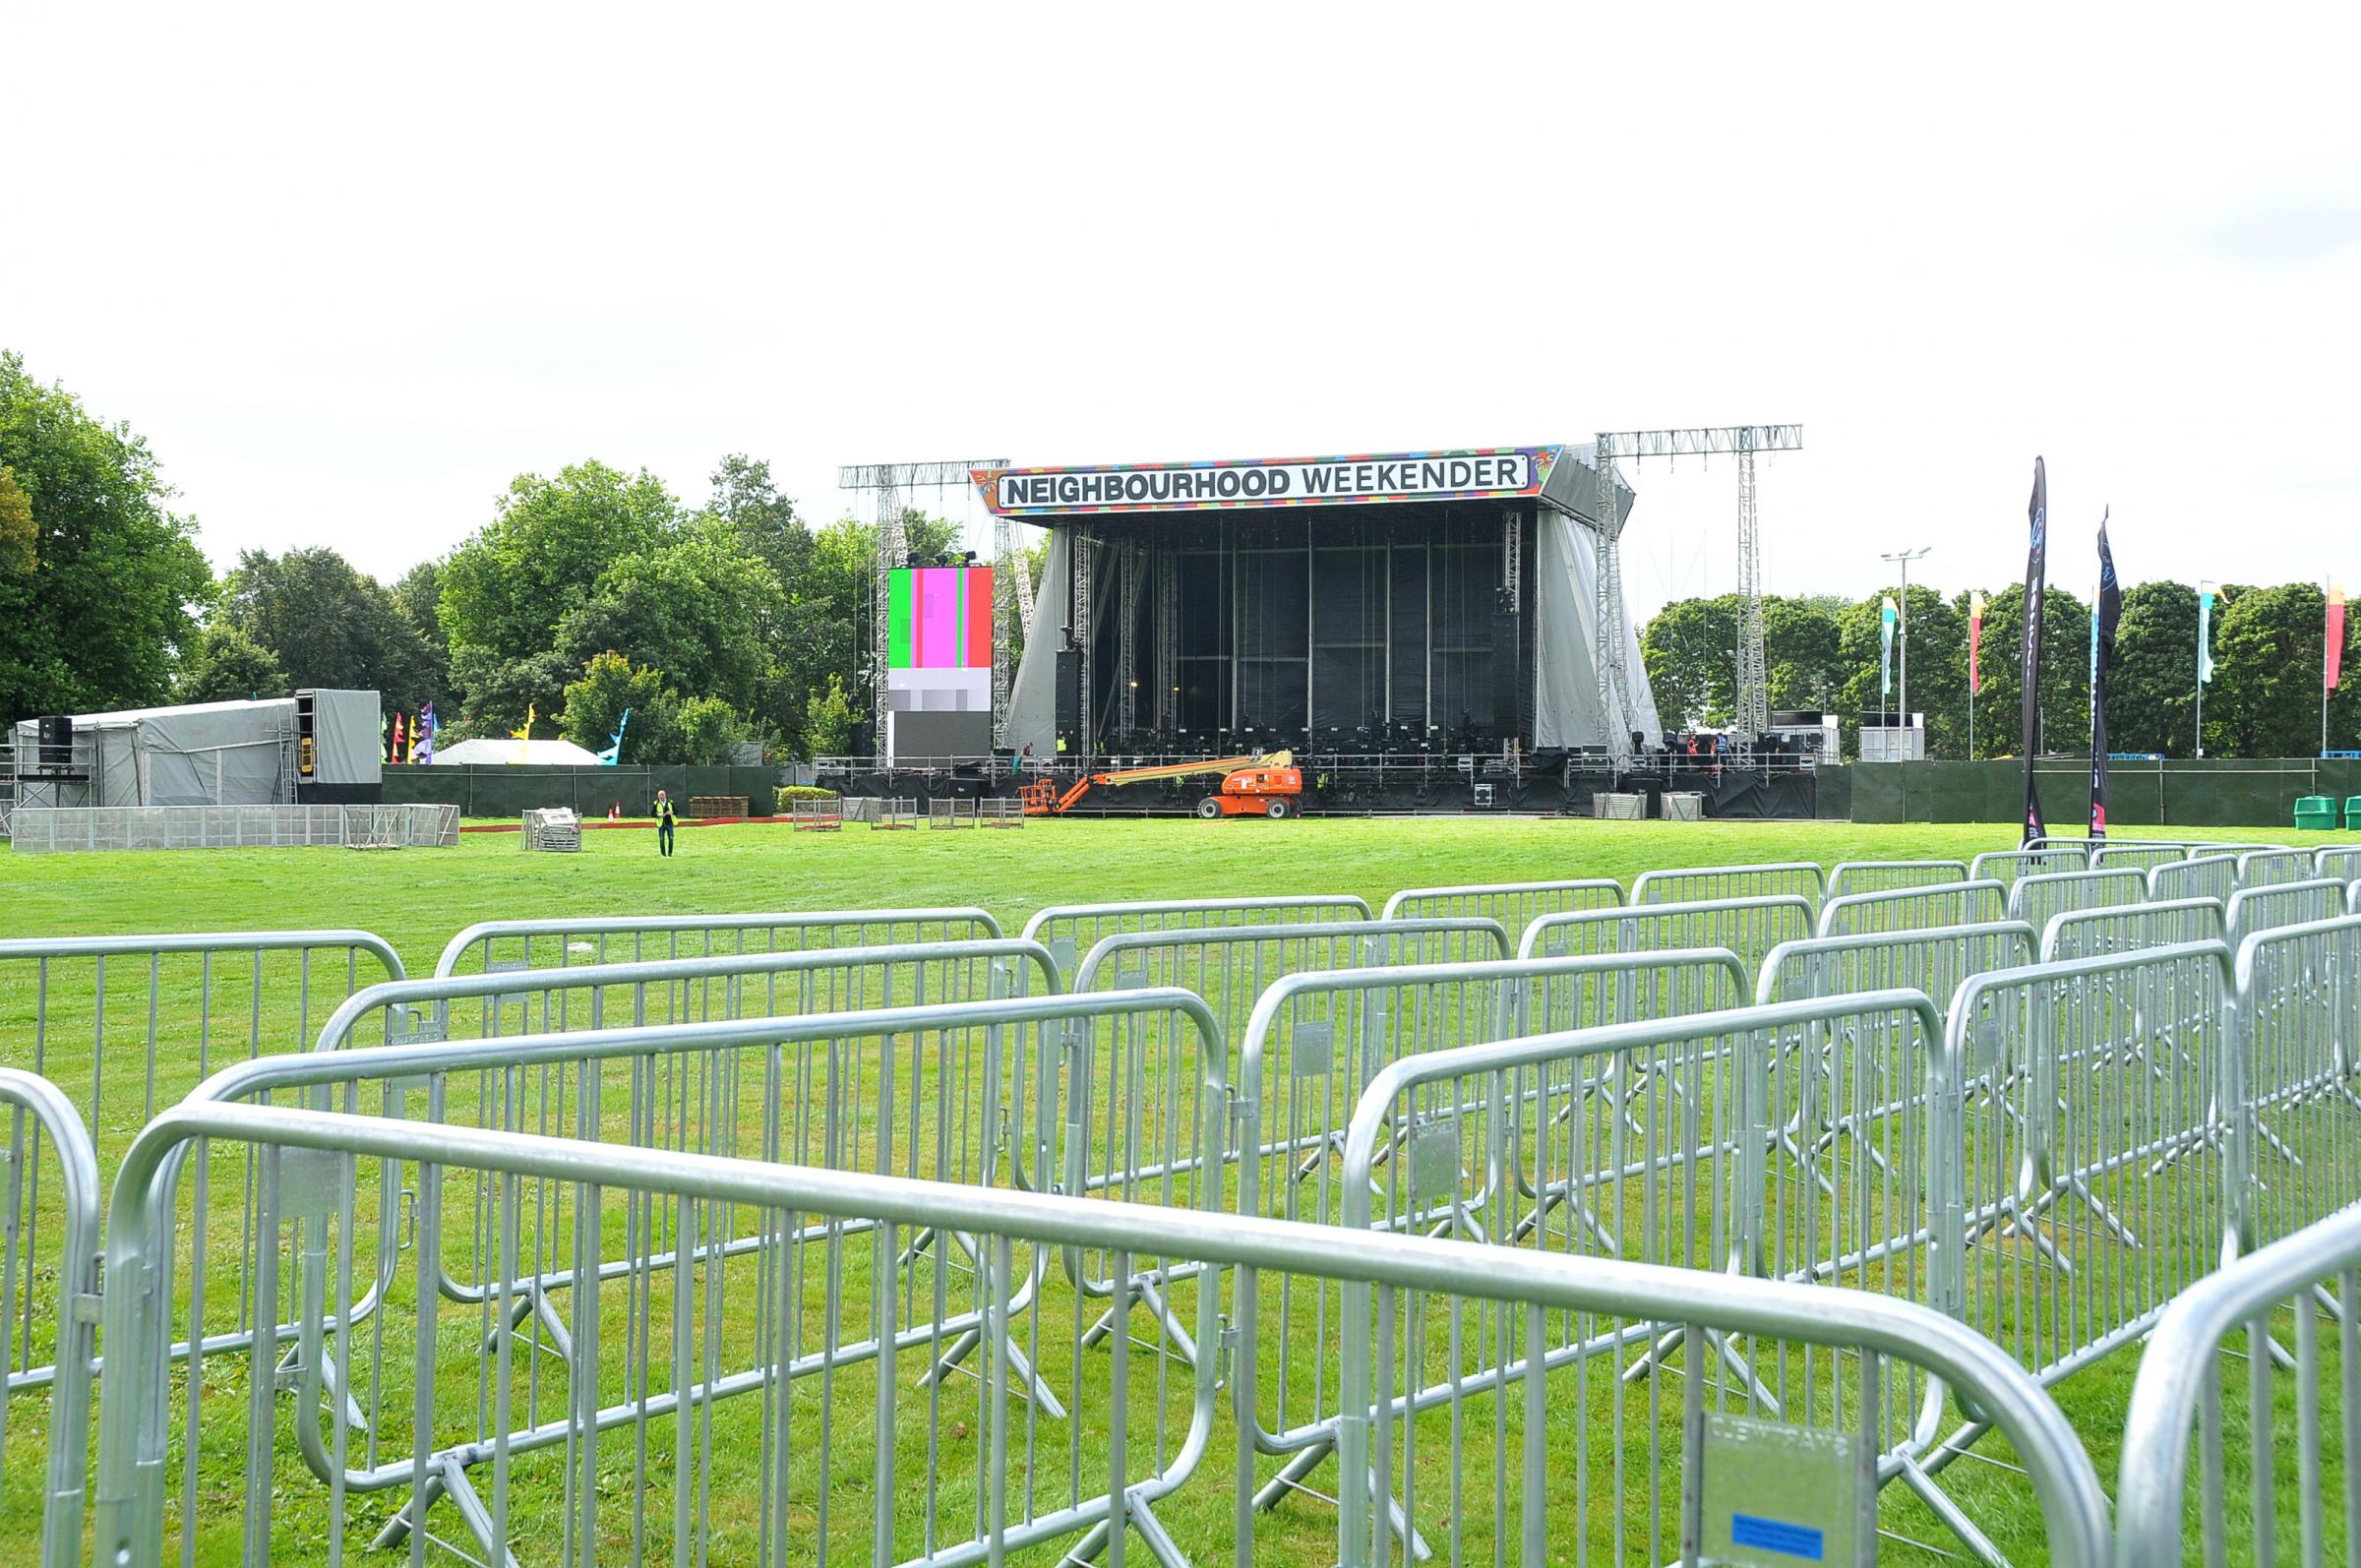 Victoria Parks transformation into the Neighbourhood Weekender site